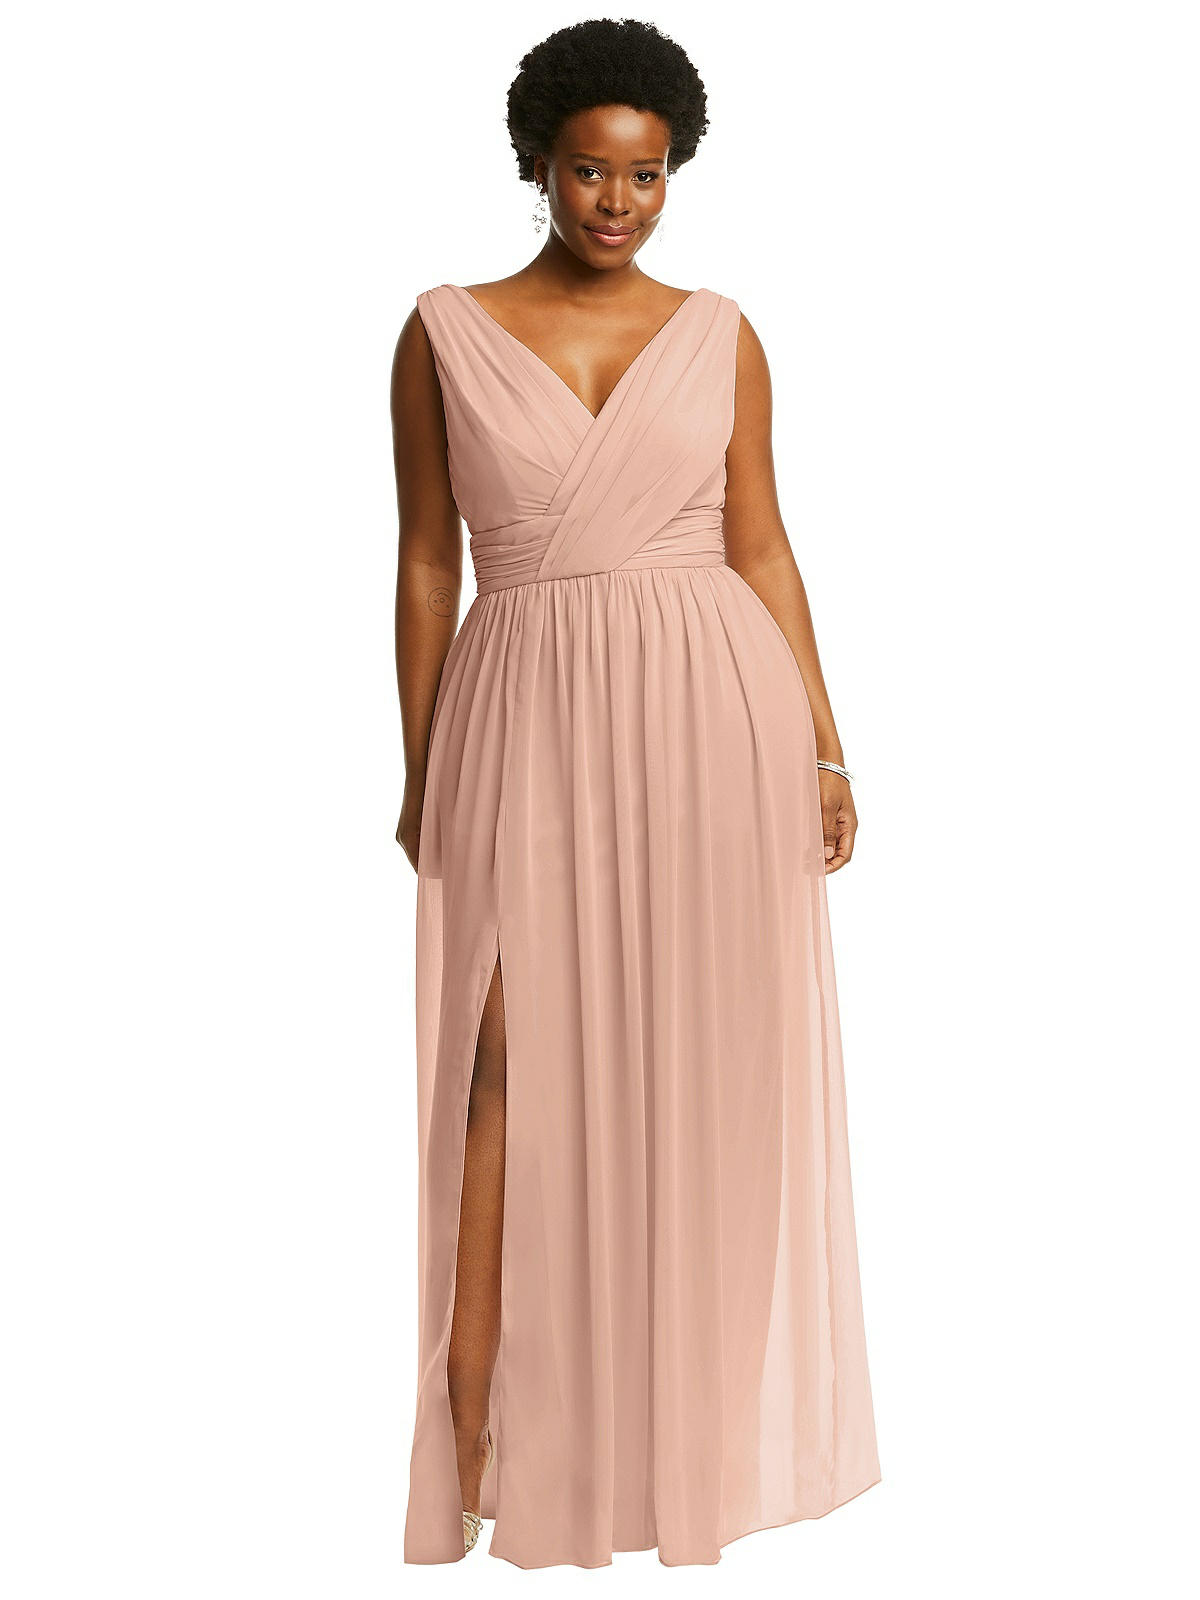 V|neck Fitted Prom Dress Blush 20537 | Promheadquarters.com